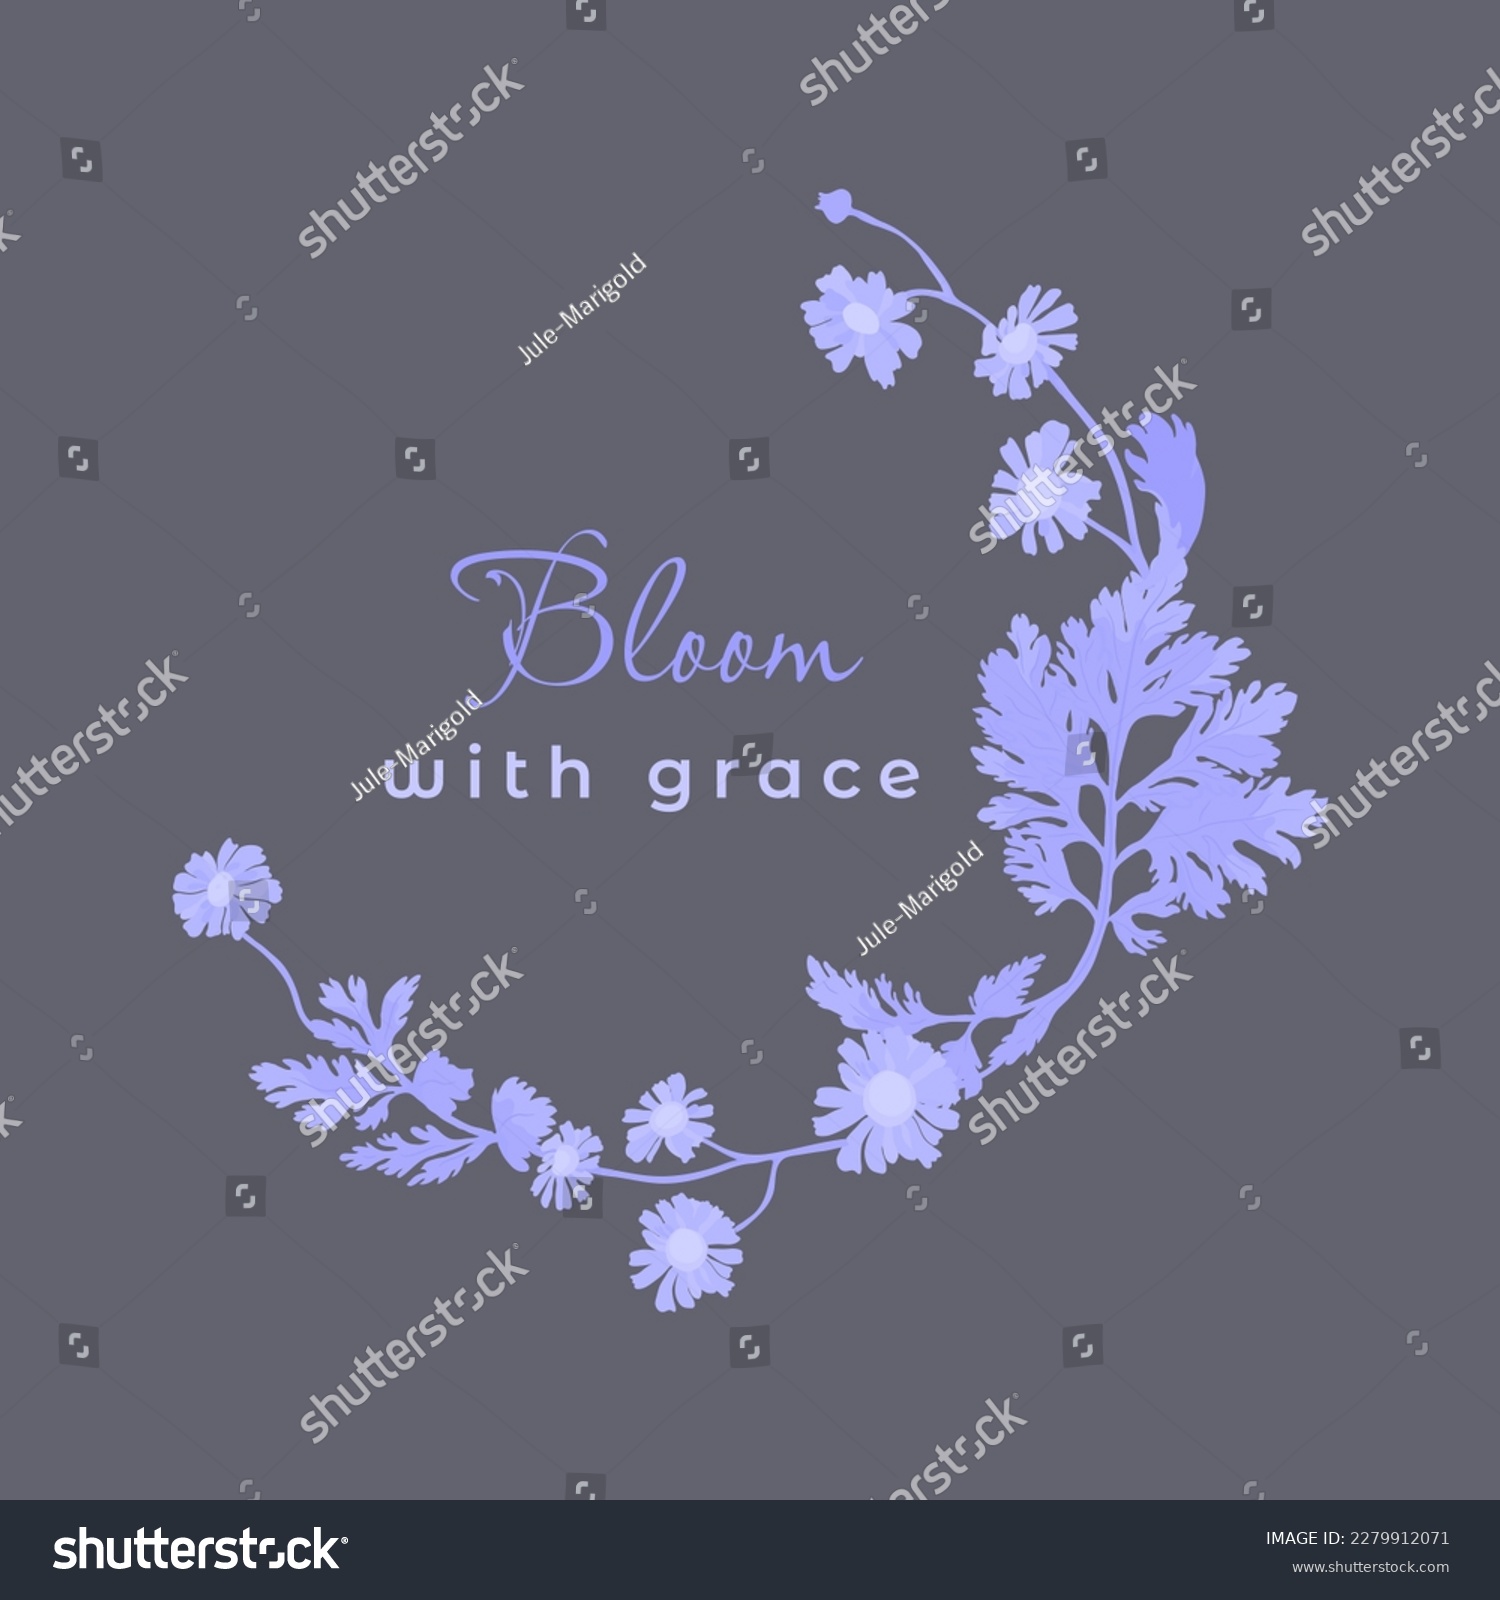 SVG of Isolated half-wreath with blue-white-colored camomile flowers. Two-colored flower parts are isolated on a darker background. Words bloom with grace in the center. svg